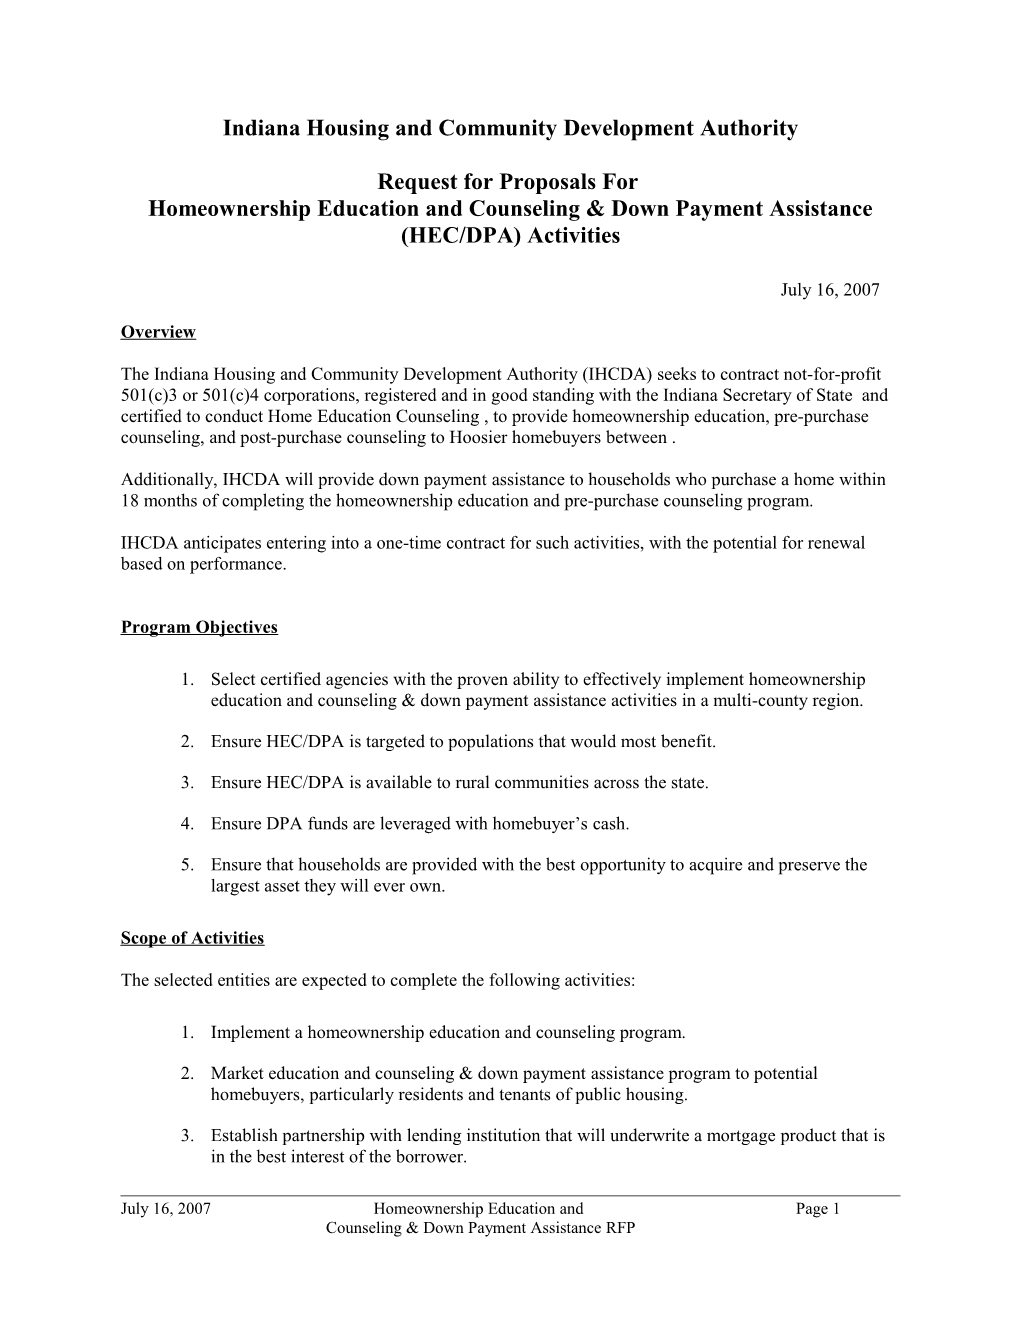 Indiana Housing Finance Authority Request for Proprosal